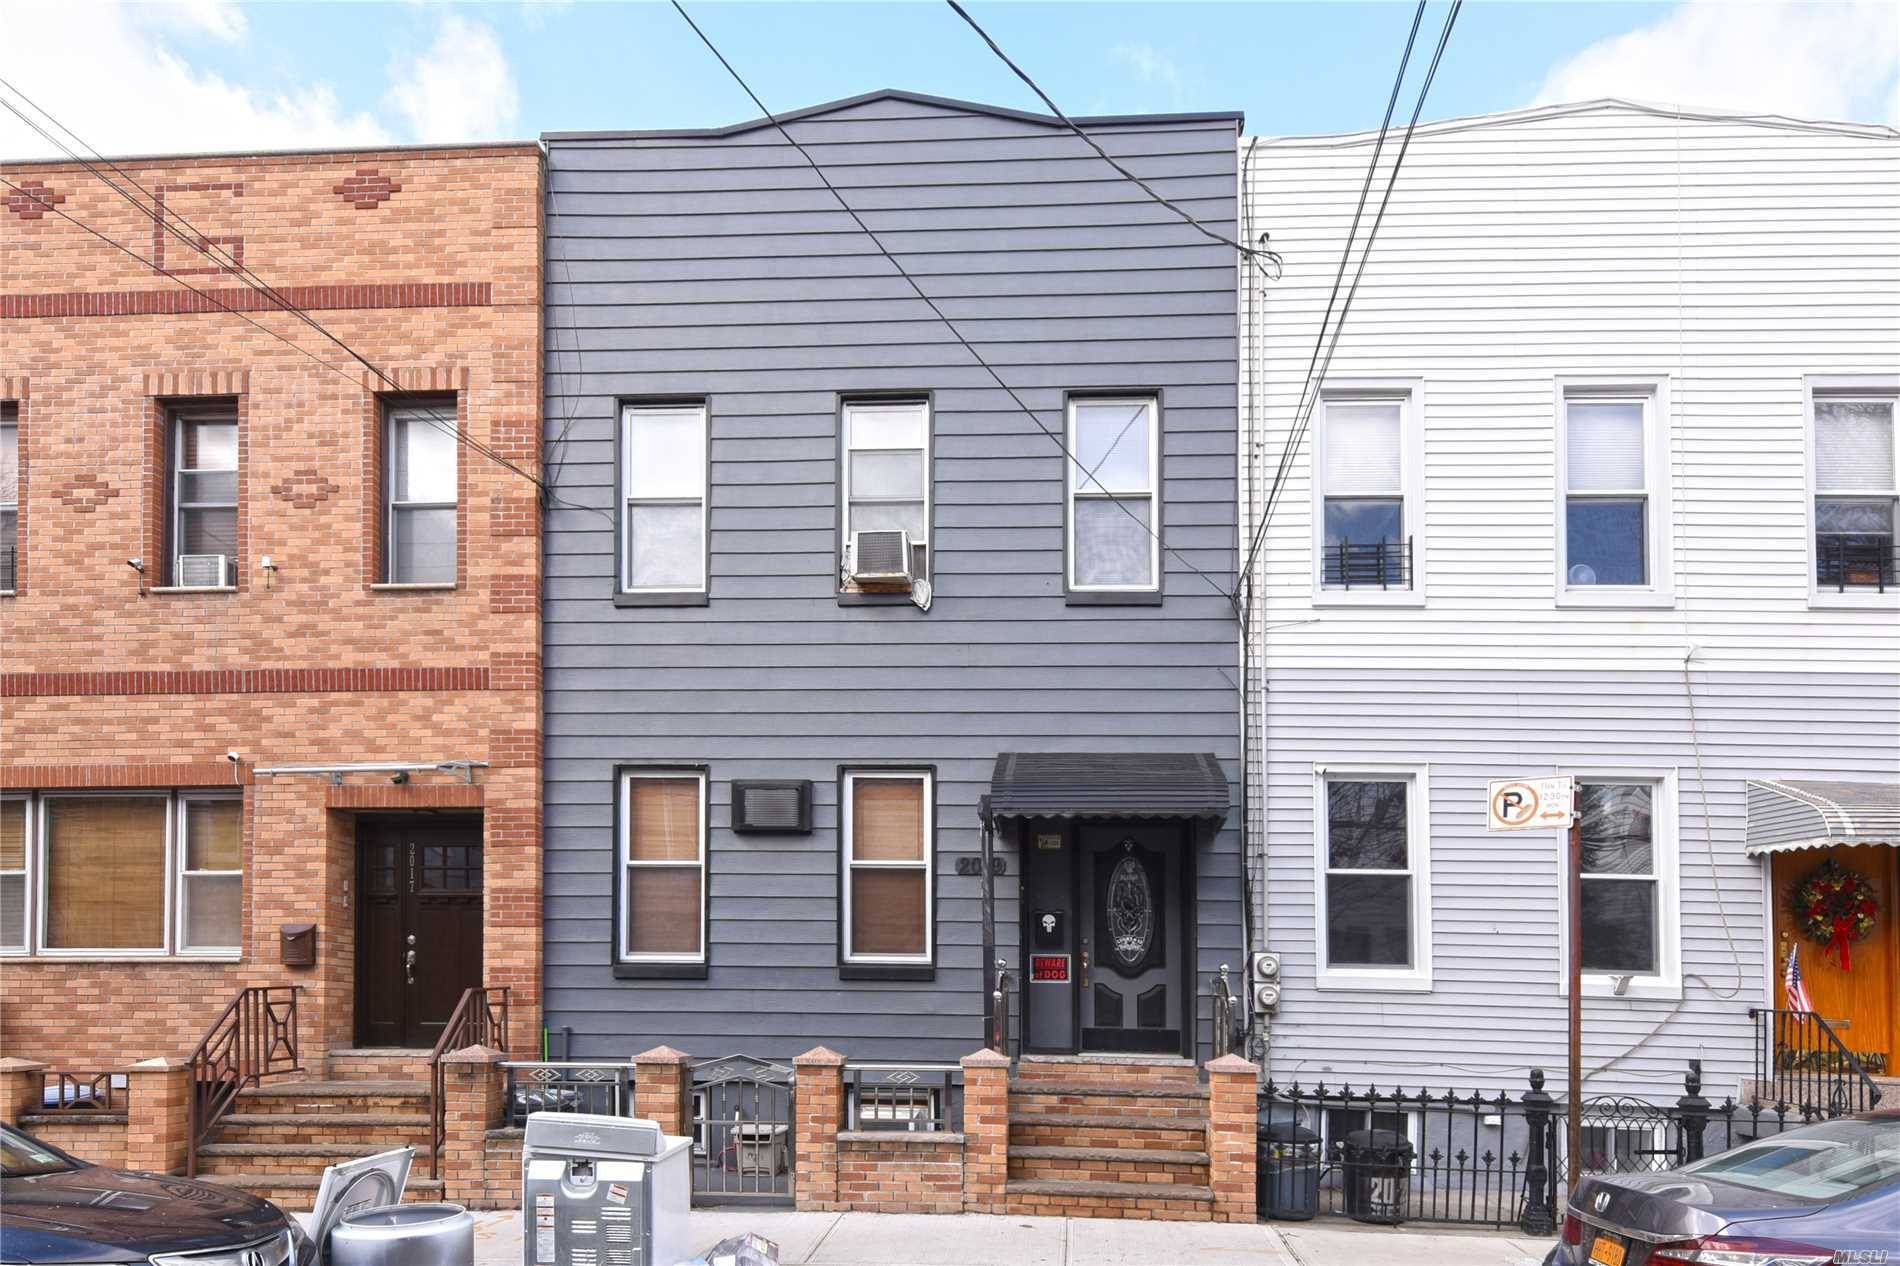 Two Family Home In Ridgewood, Queens With Low Taxes $4,235.